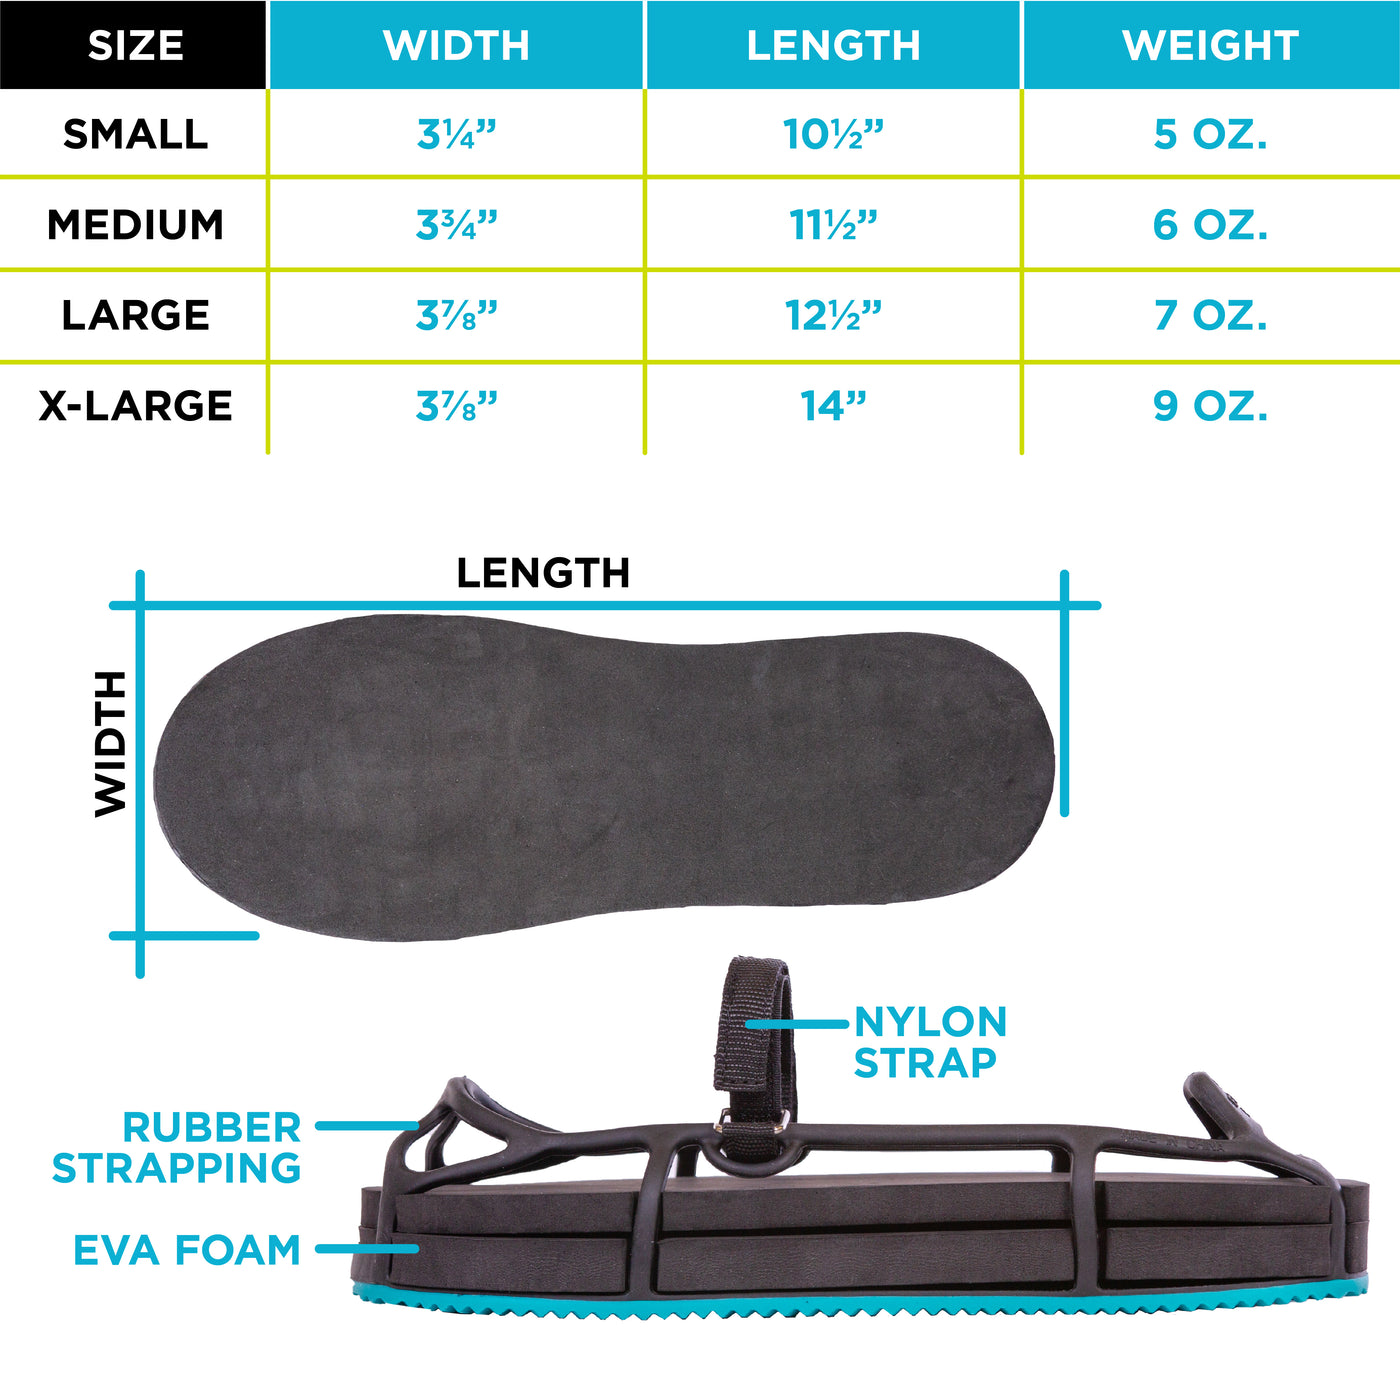 The evenup shoe lift for uneven legs has rubber strapping and a nylon strap